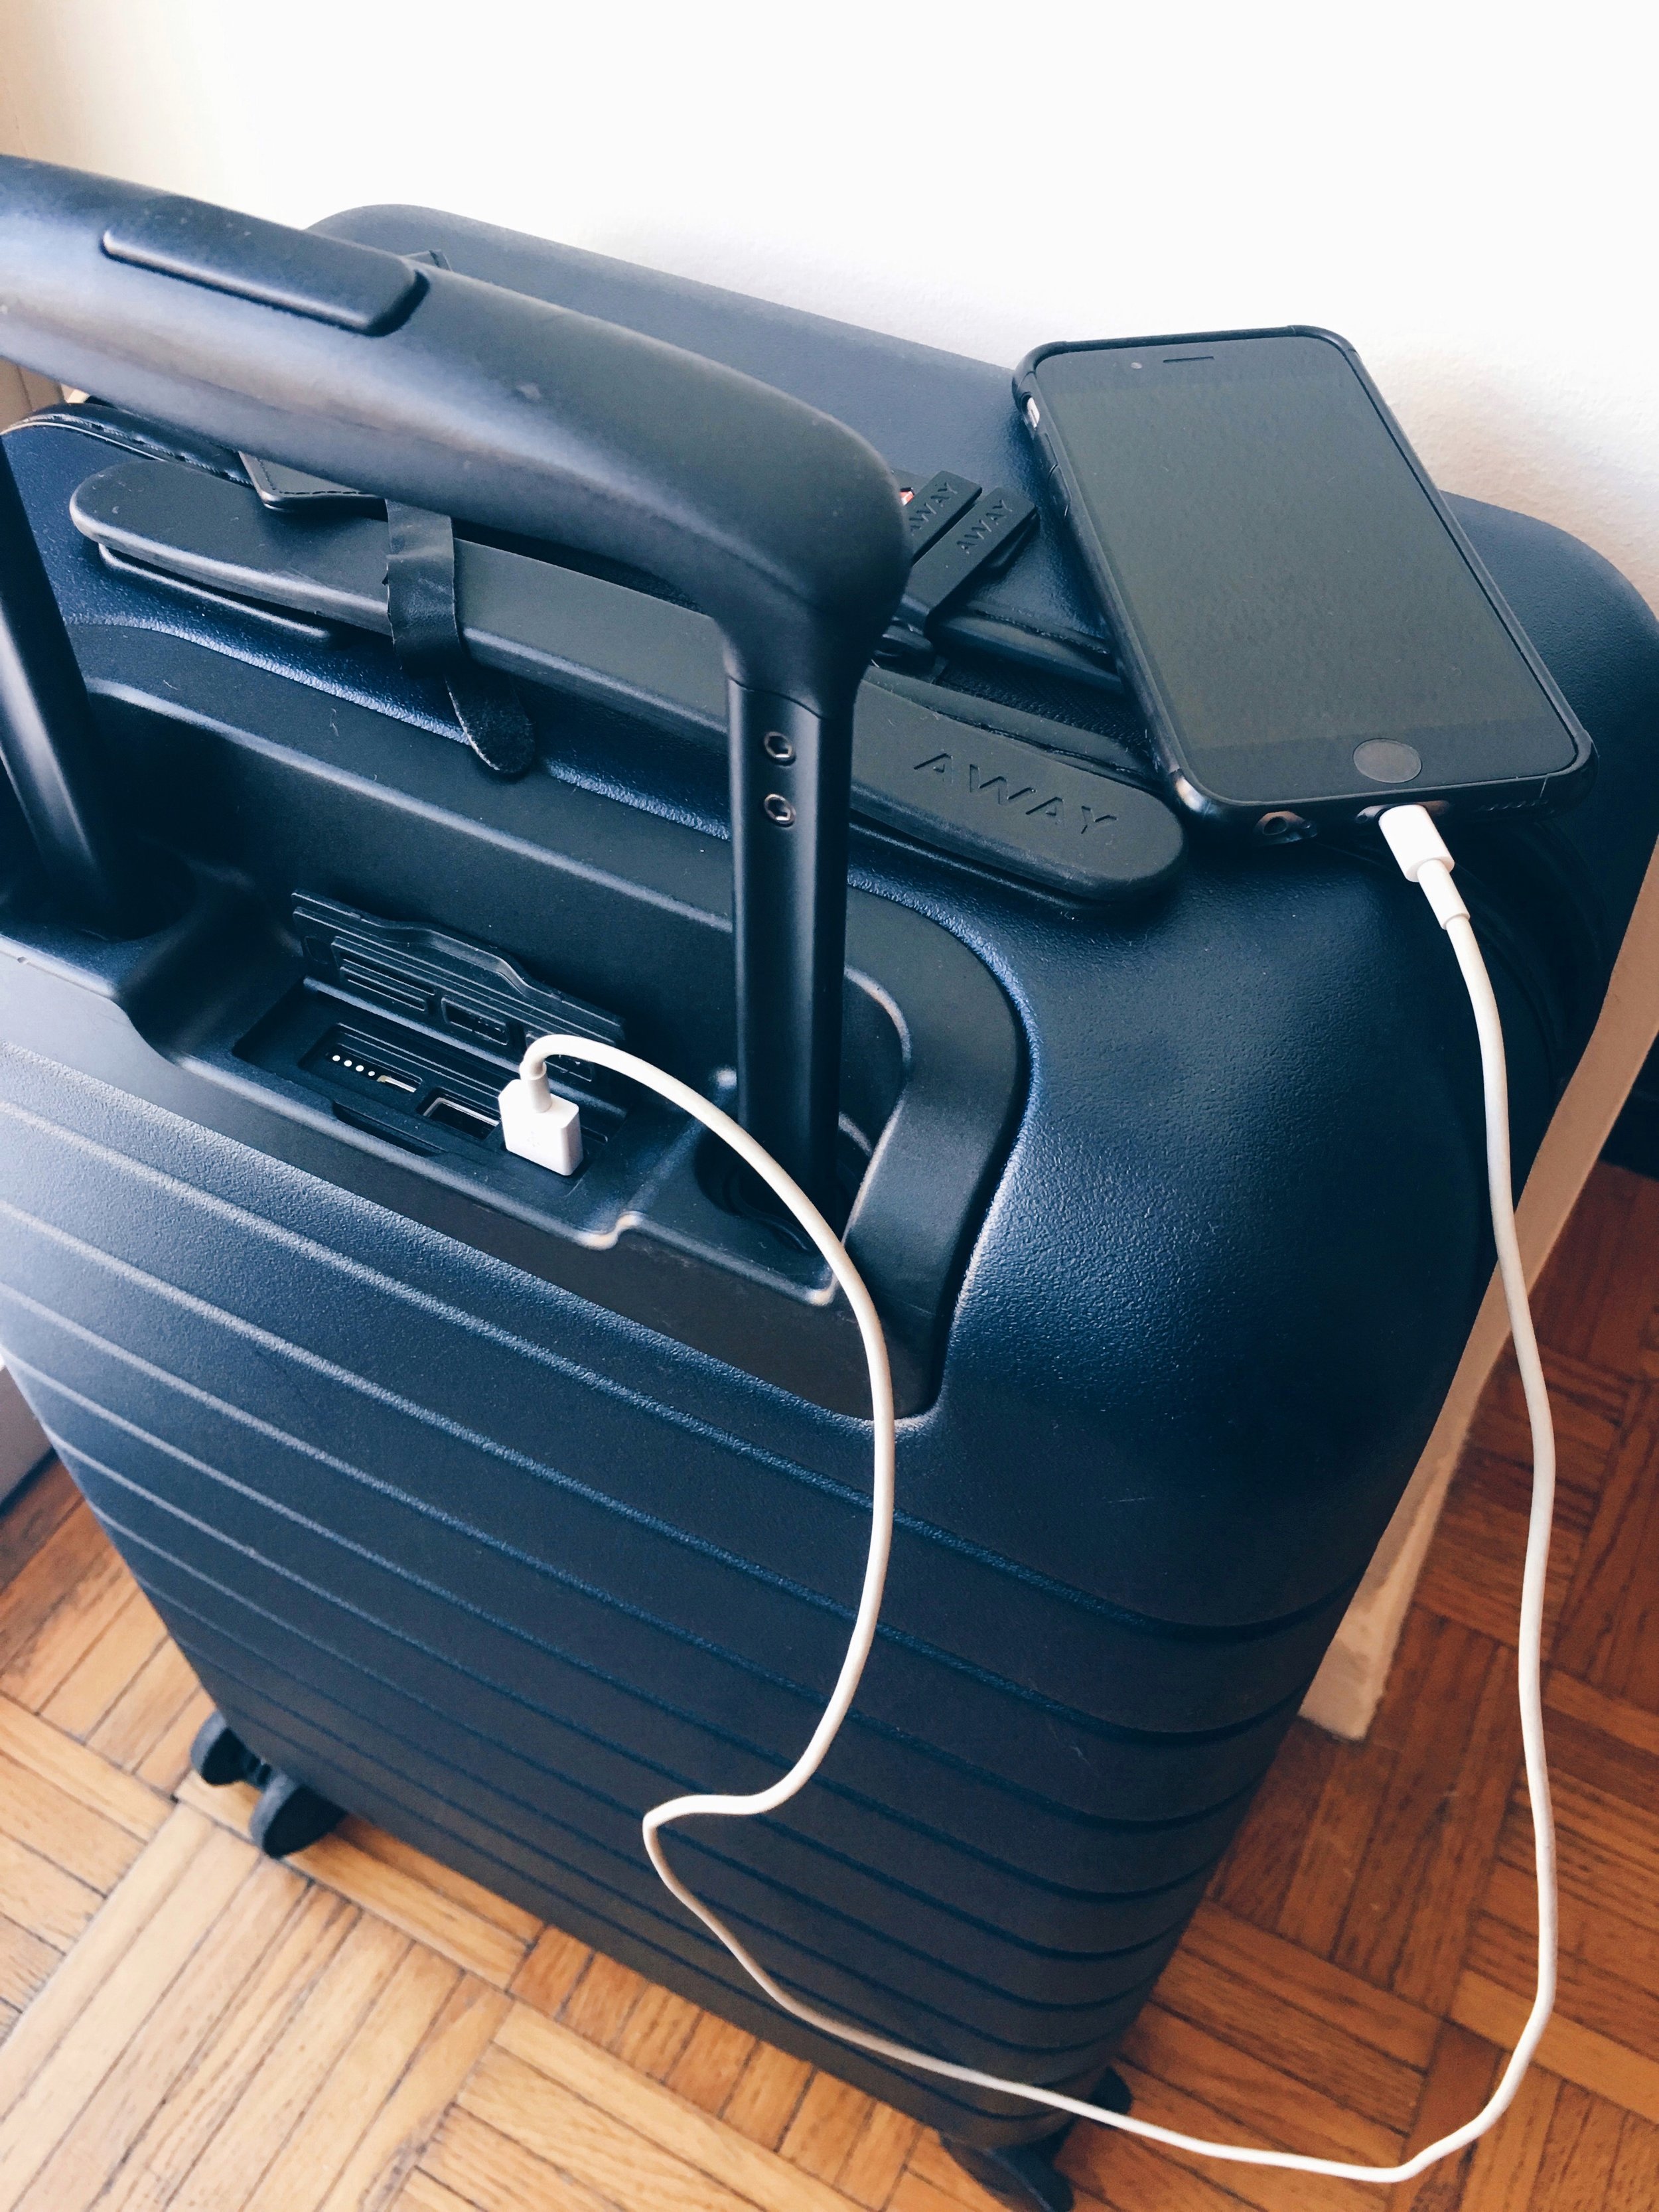 away travel luggage with charger